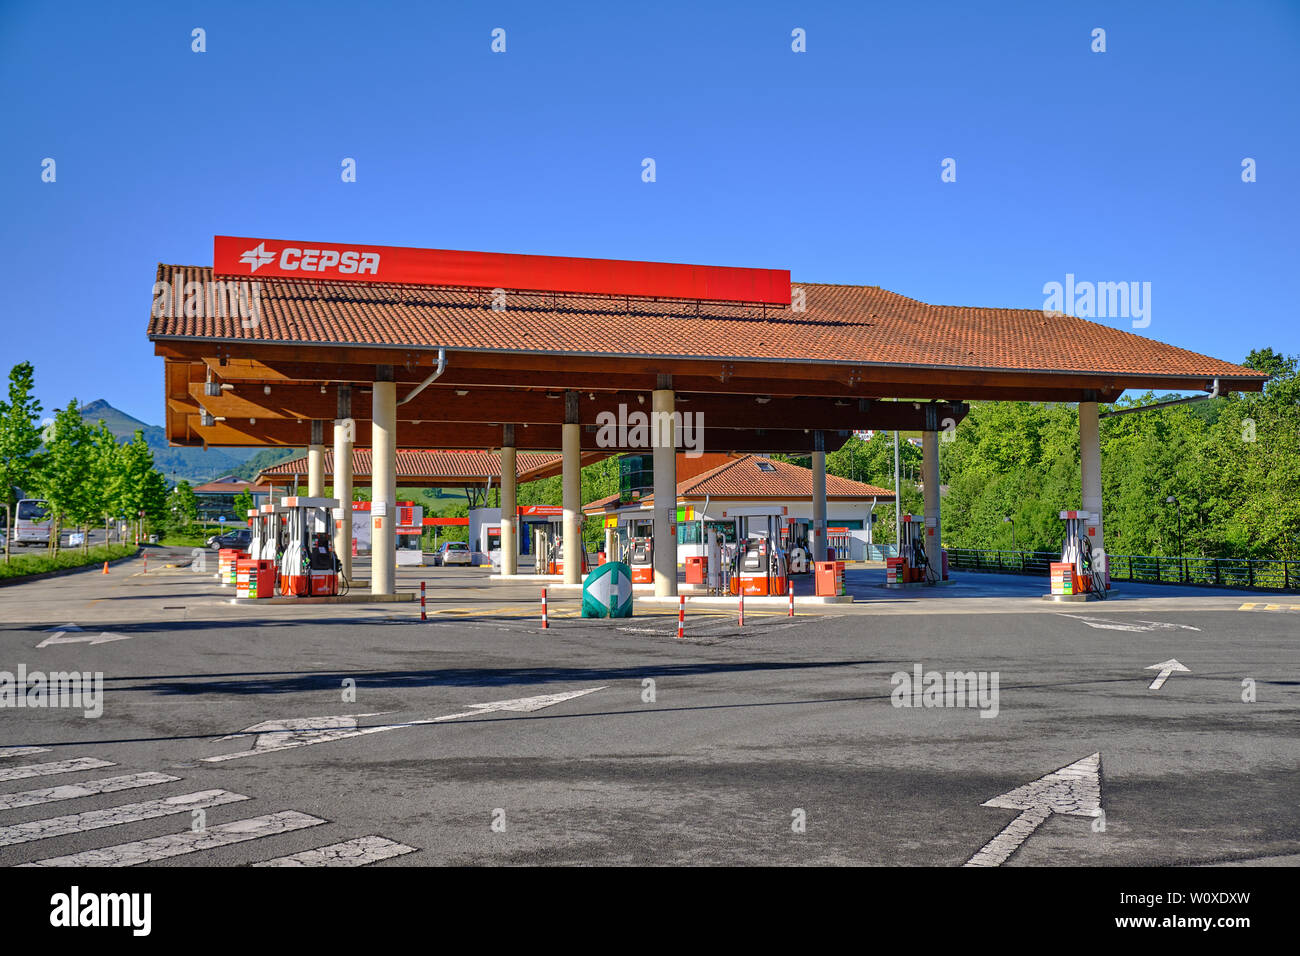 Dantxarinea, Spain: Large CEPSA petrol station at Spain France border, which still gets cross border shopping from France due to lower price Stock Photo